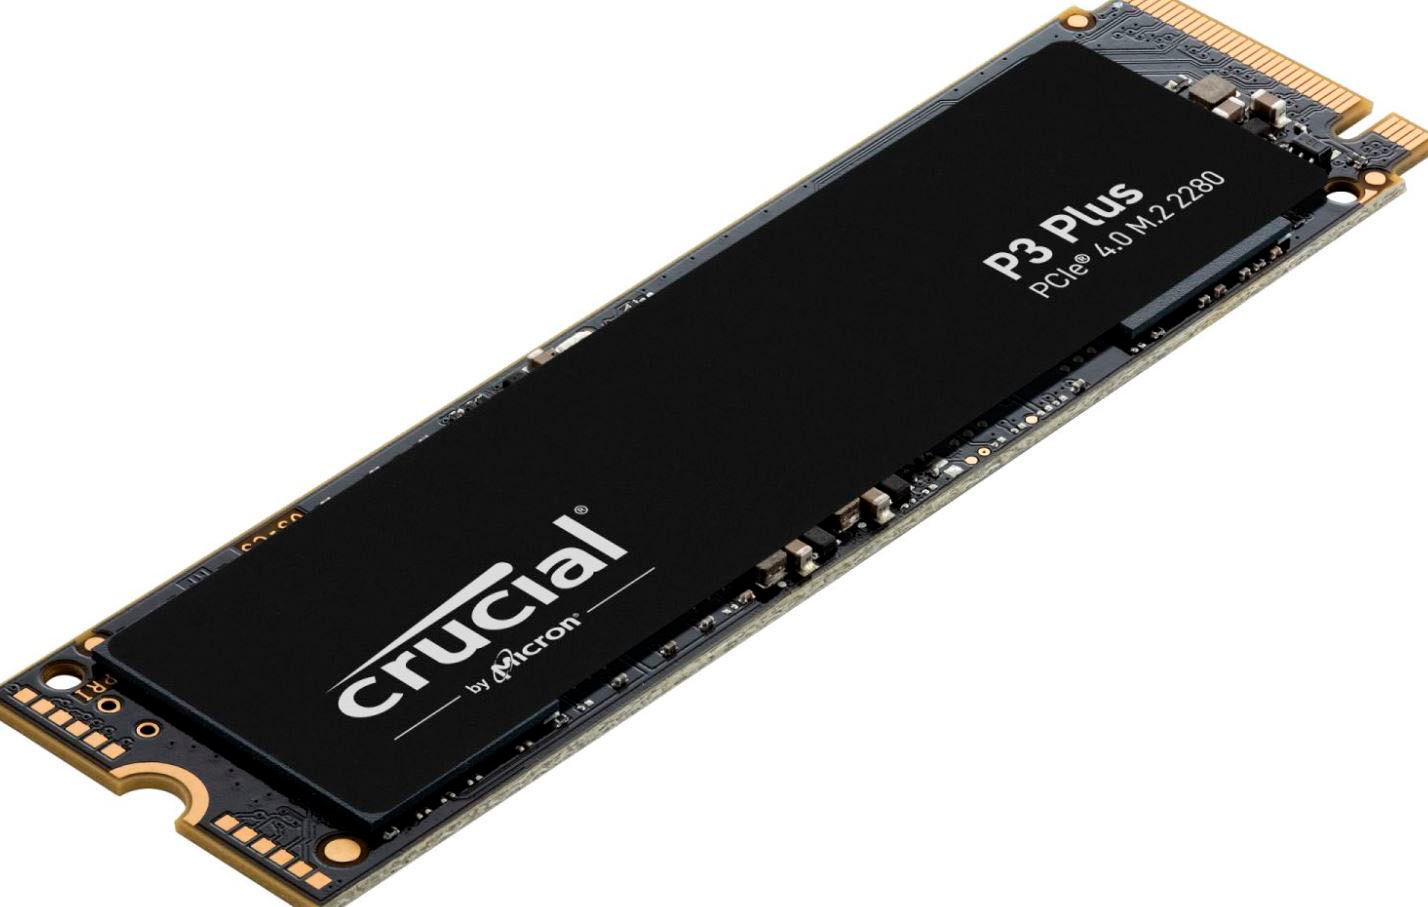 2TB Crucial P3 Plus PCIe NVMe M.2 Solid State Drive